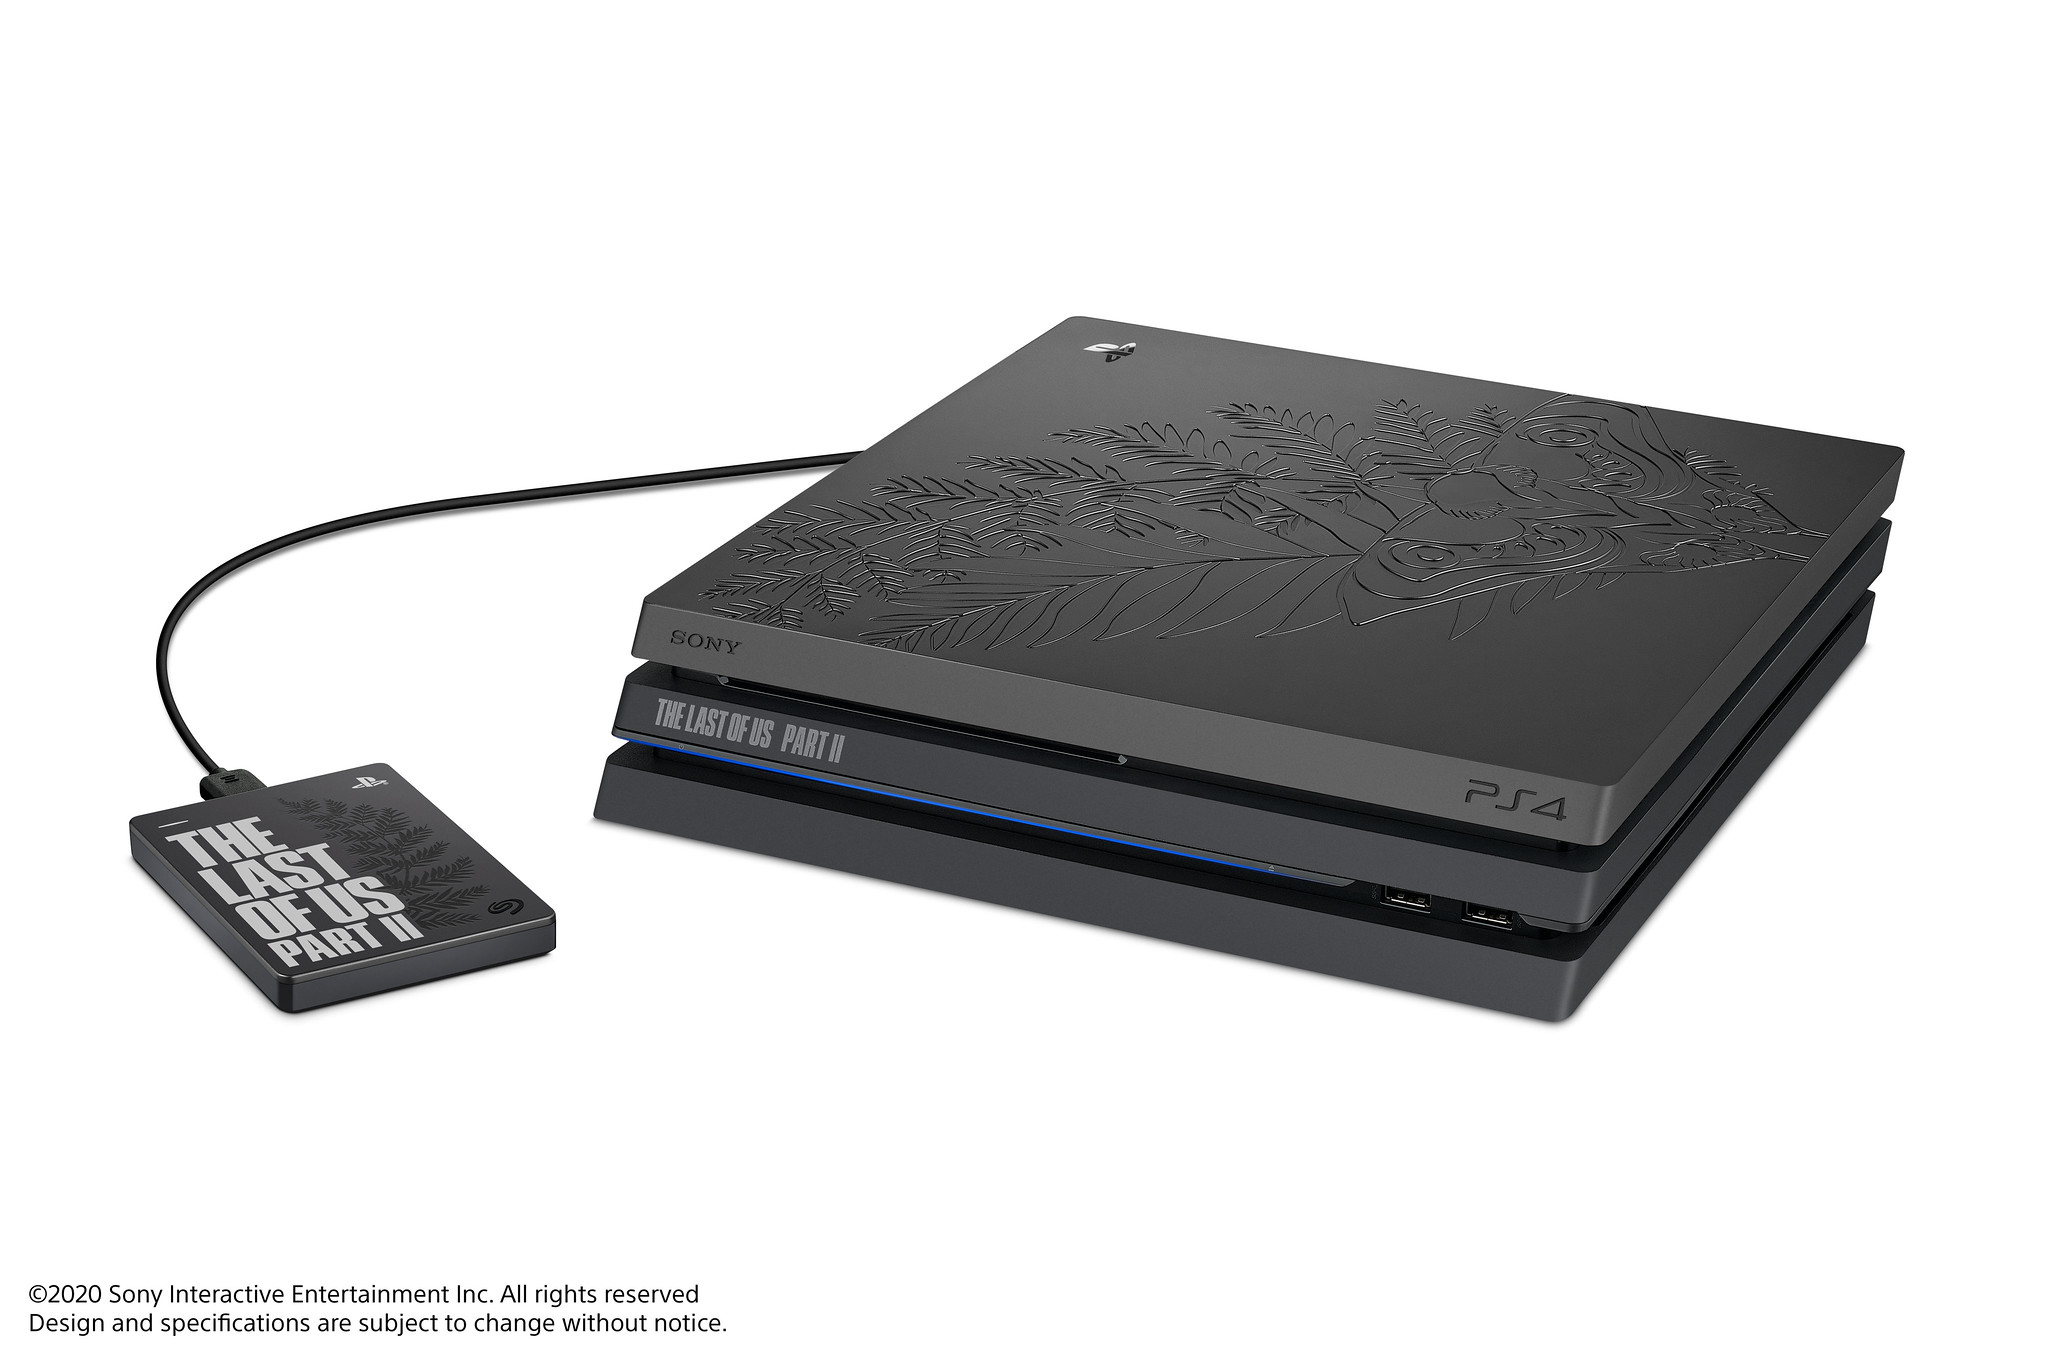 The Last of Us 2 themed PlayStation 4 Pro up for pre-order; will 